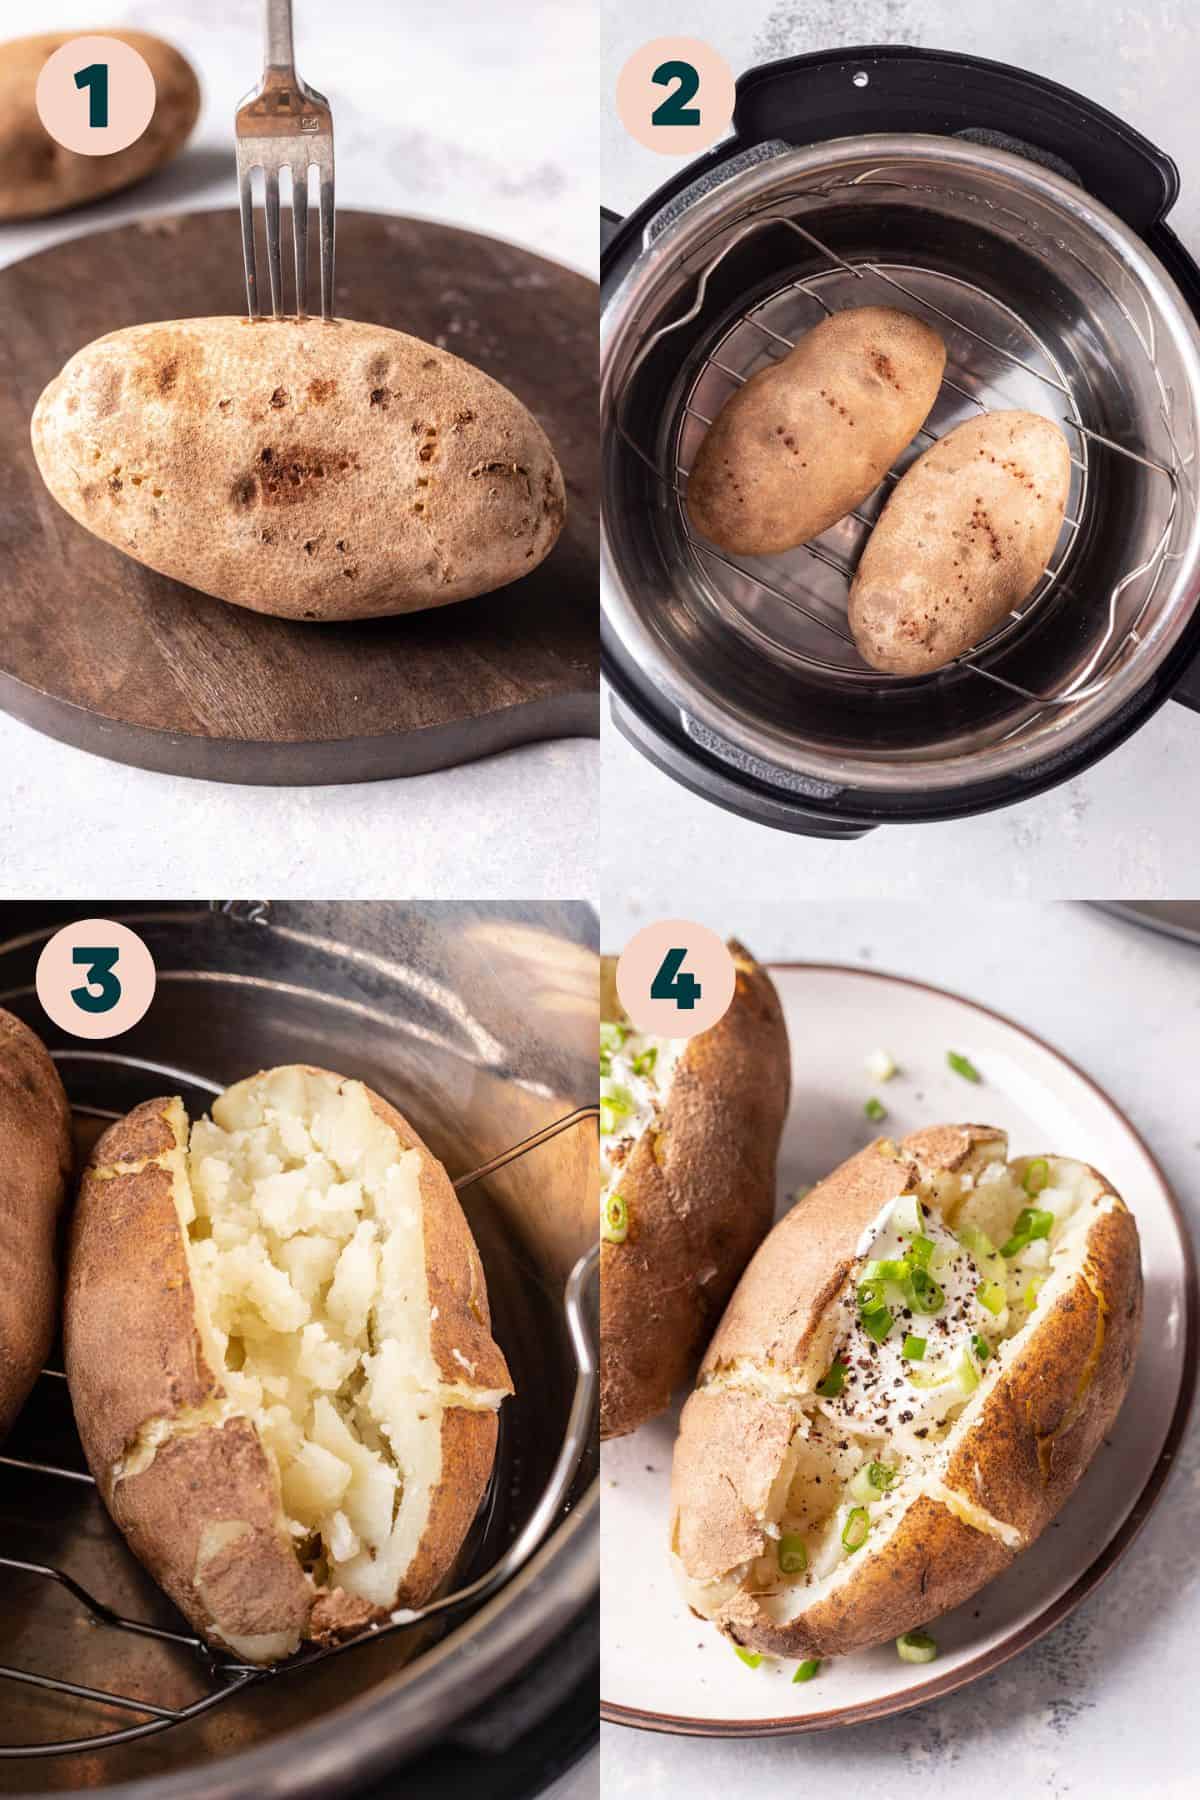 4 images showing step by step process of making Instant Pot baked potatoes.